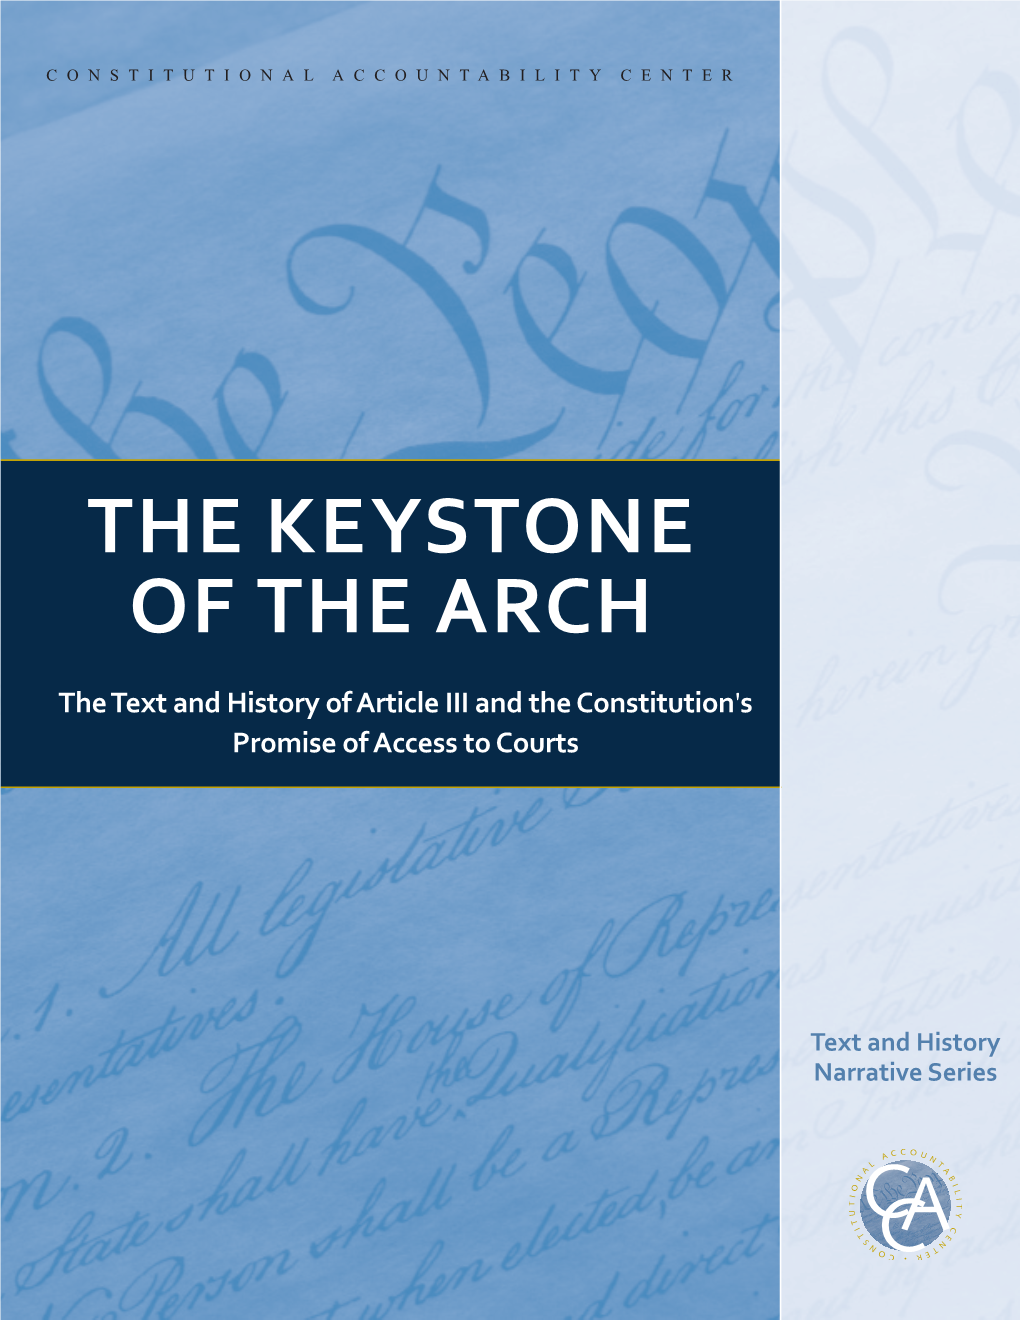 The Keystone of the Arch